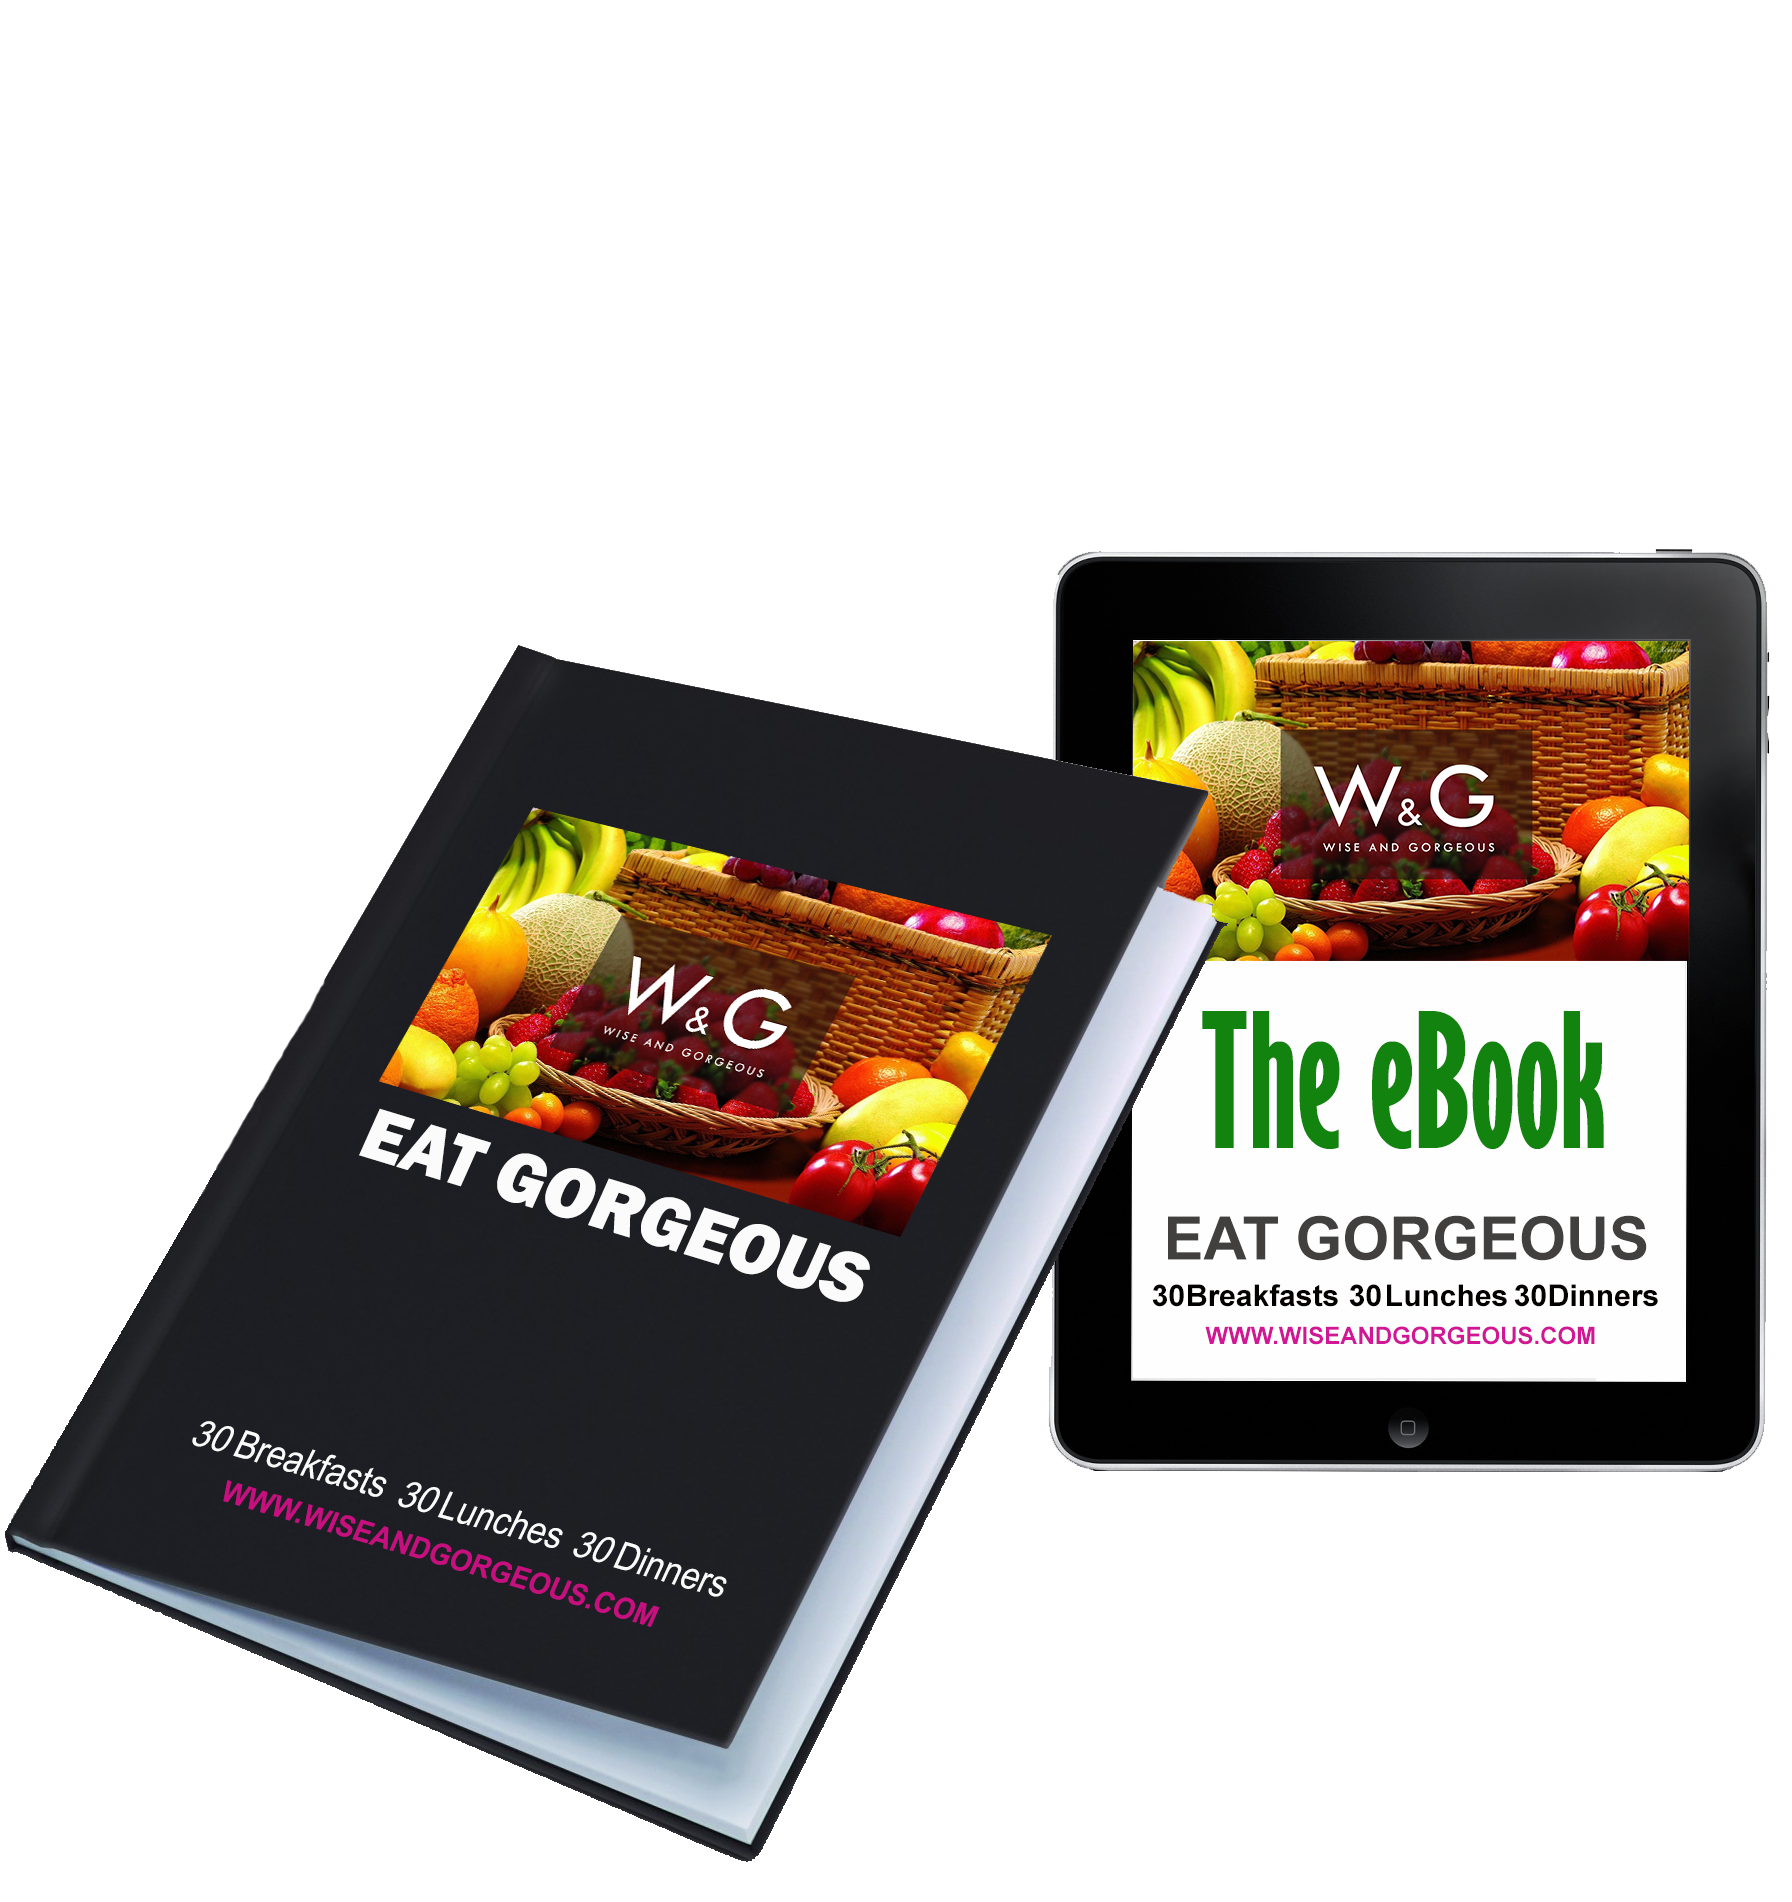 Eat Gorgeous ebook and book3